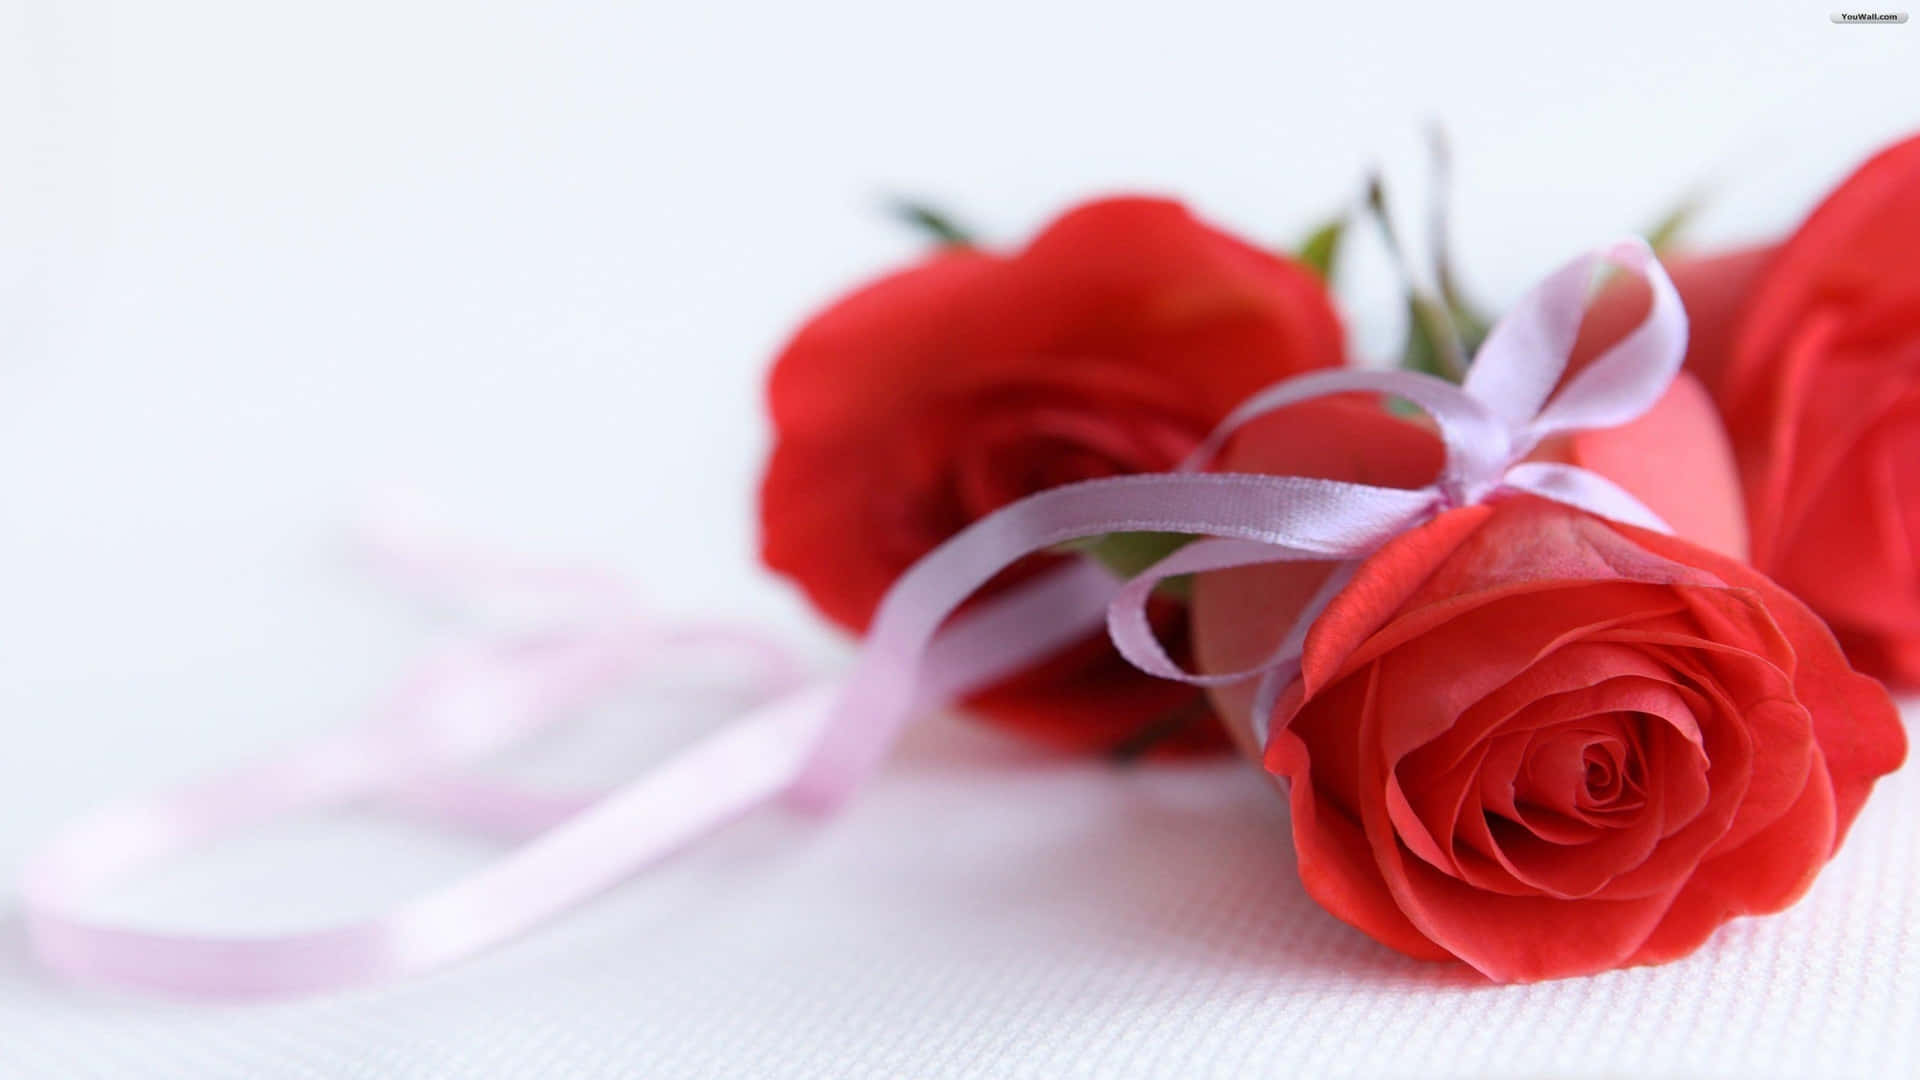 1080p Red Roses With Ribbons Background